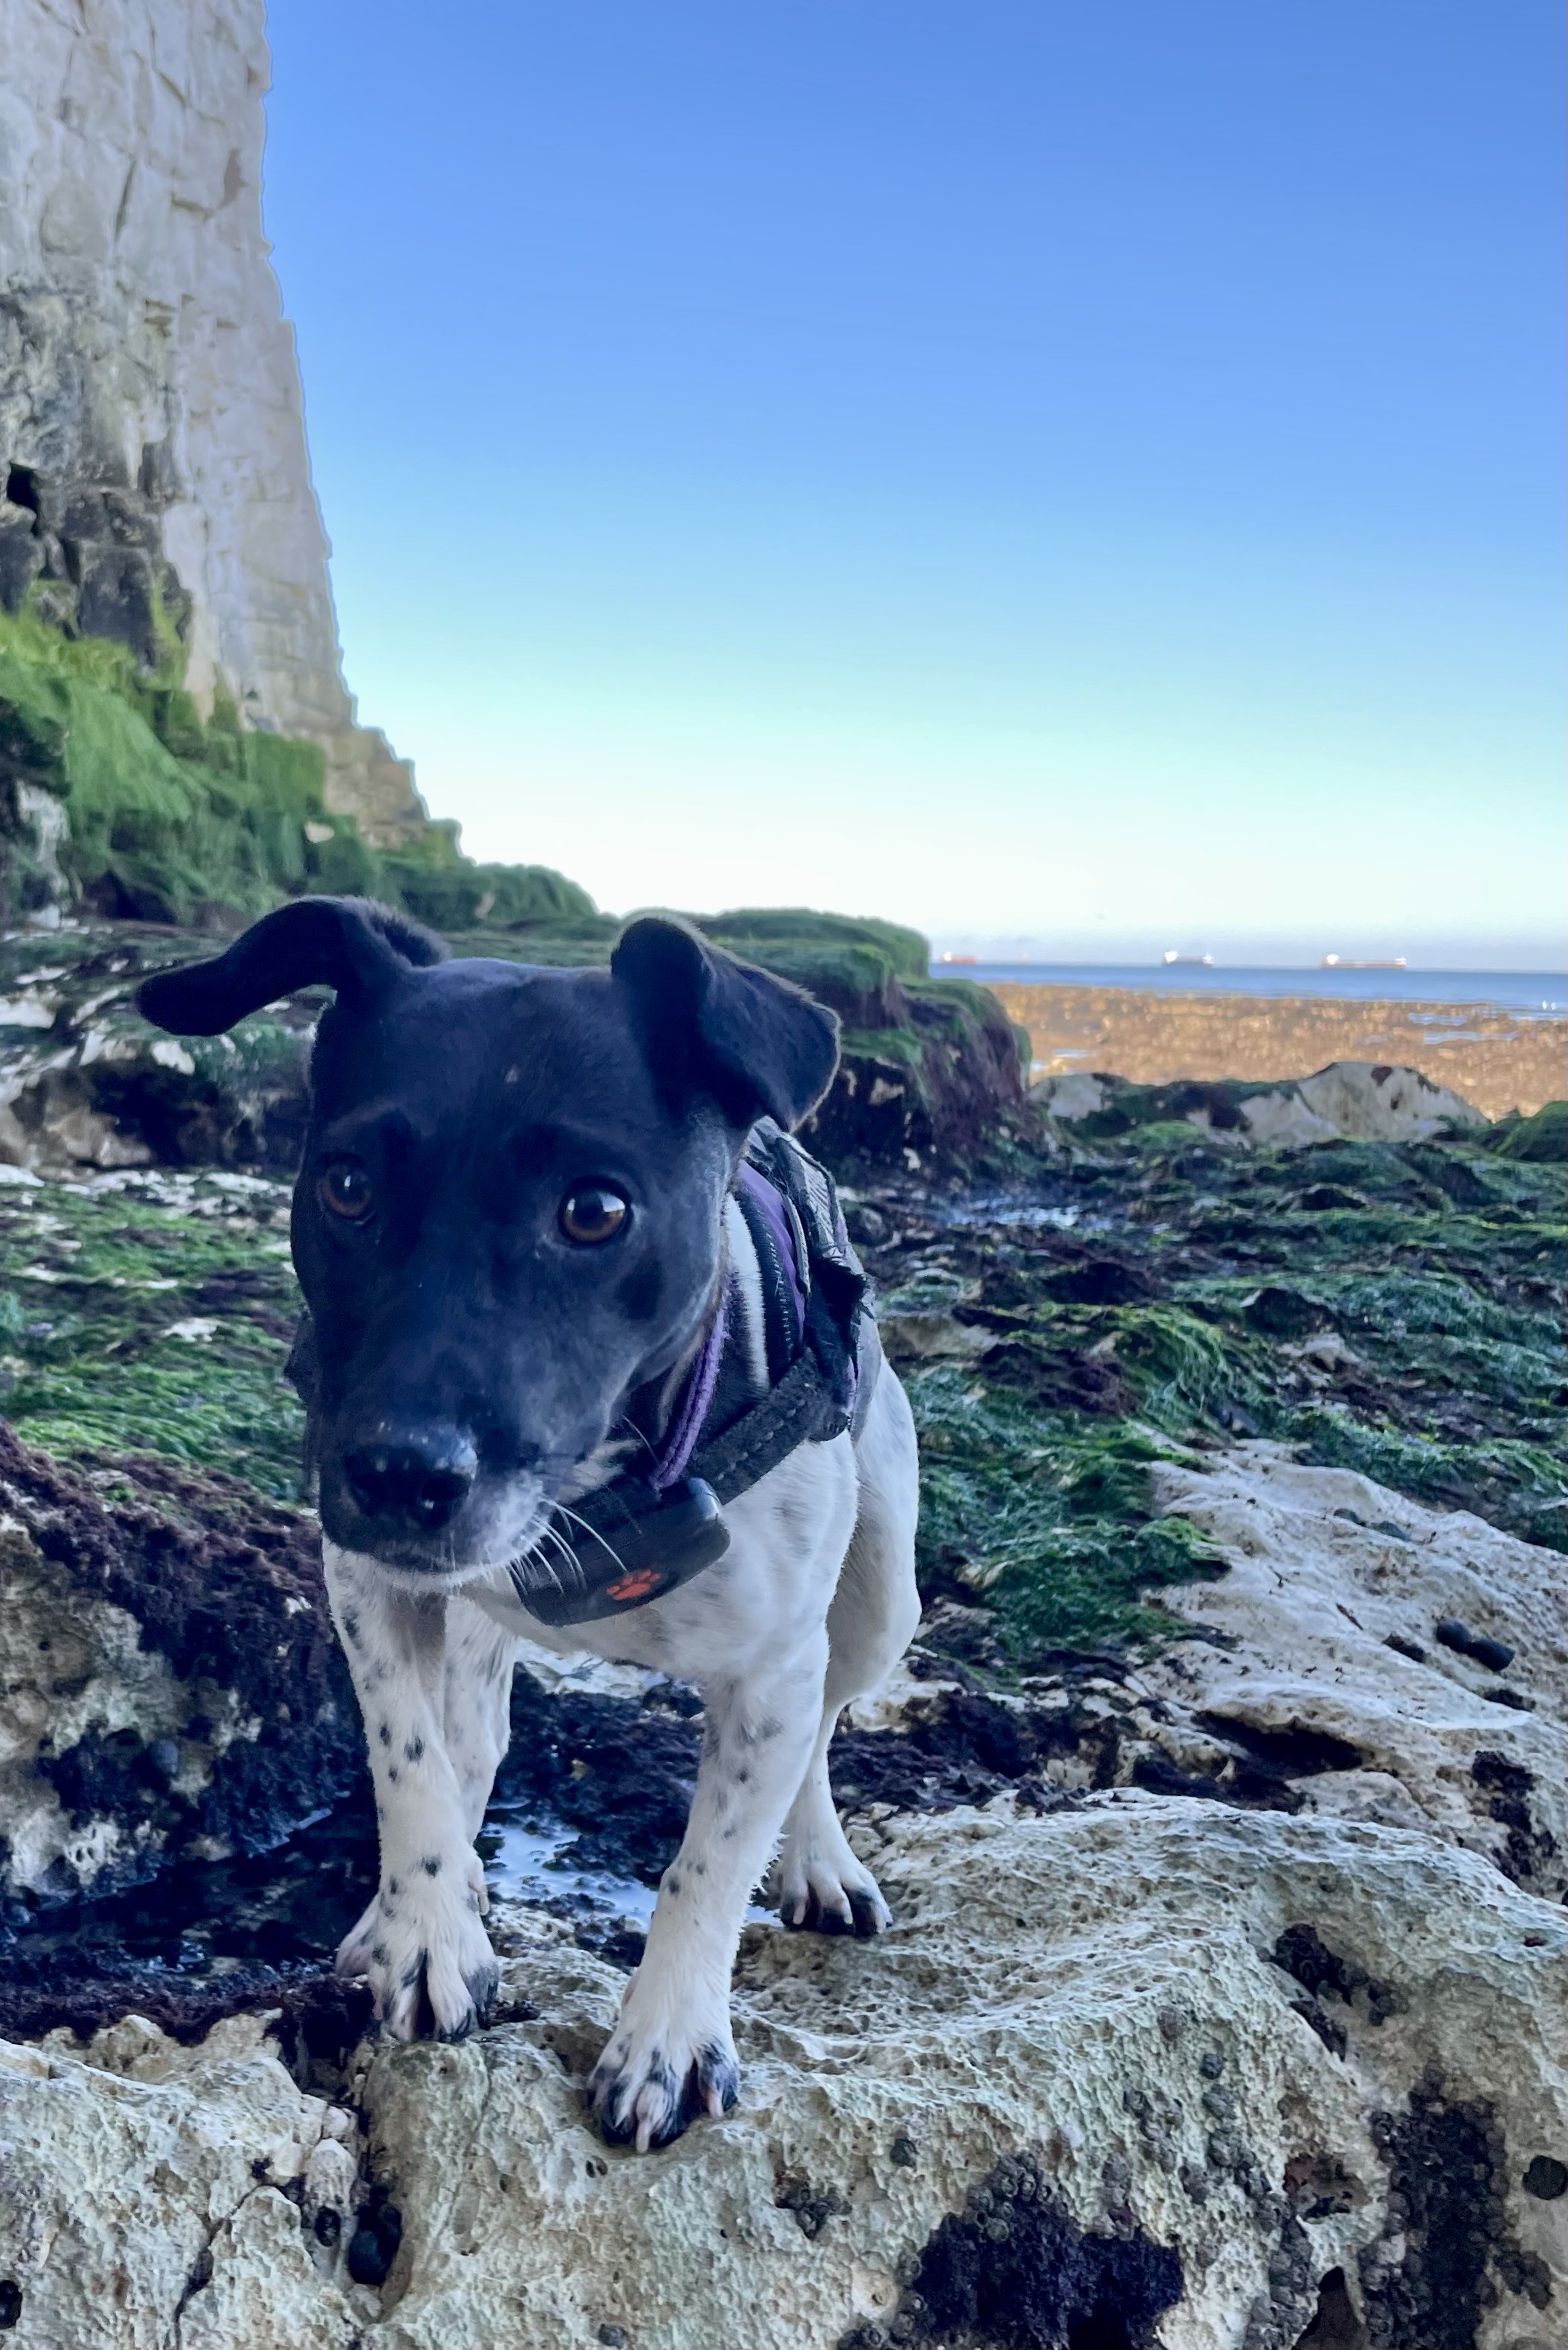 A small black and white terrier standing on a chalk ledge with a sandy beach, seaweed, and sea in the background.